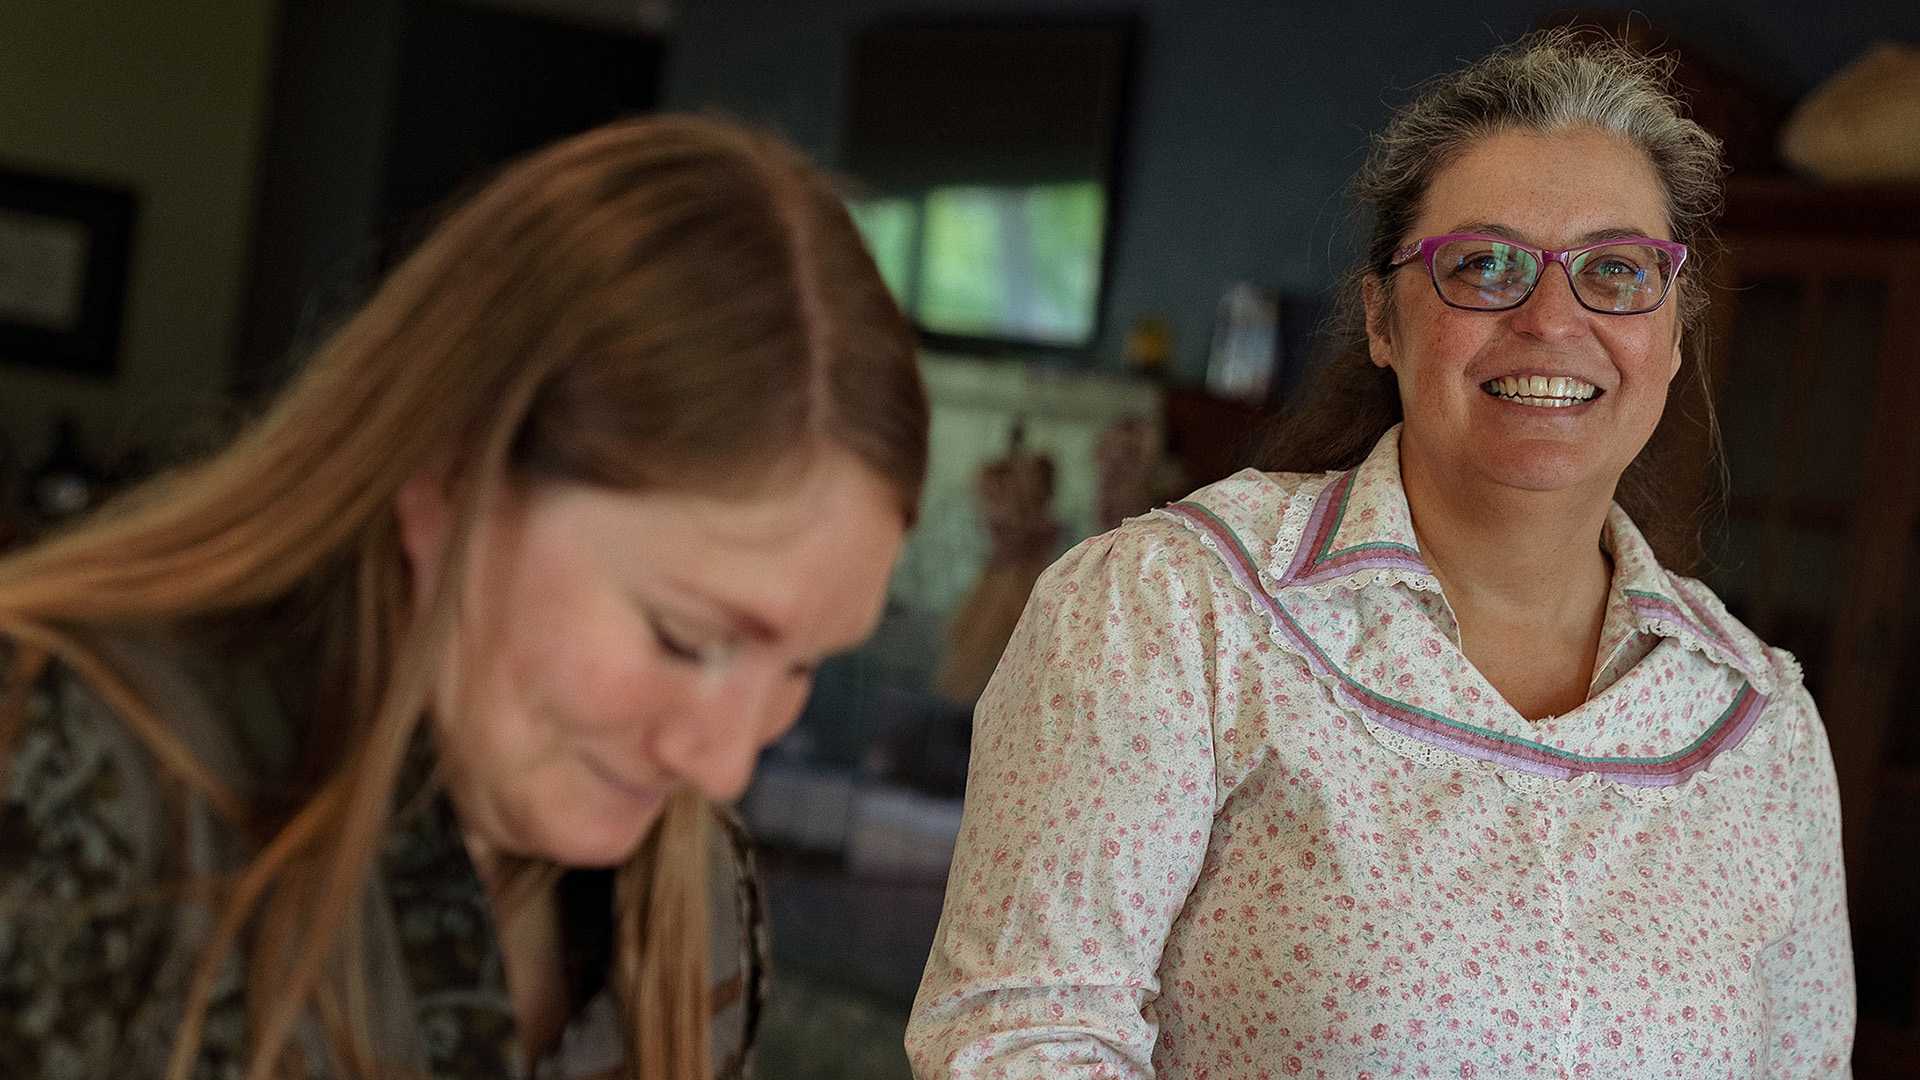 Two women from the Oneida Nation of Wisconsin smile for the camera while in a kitchen making Oneida white corn soup.